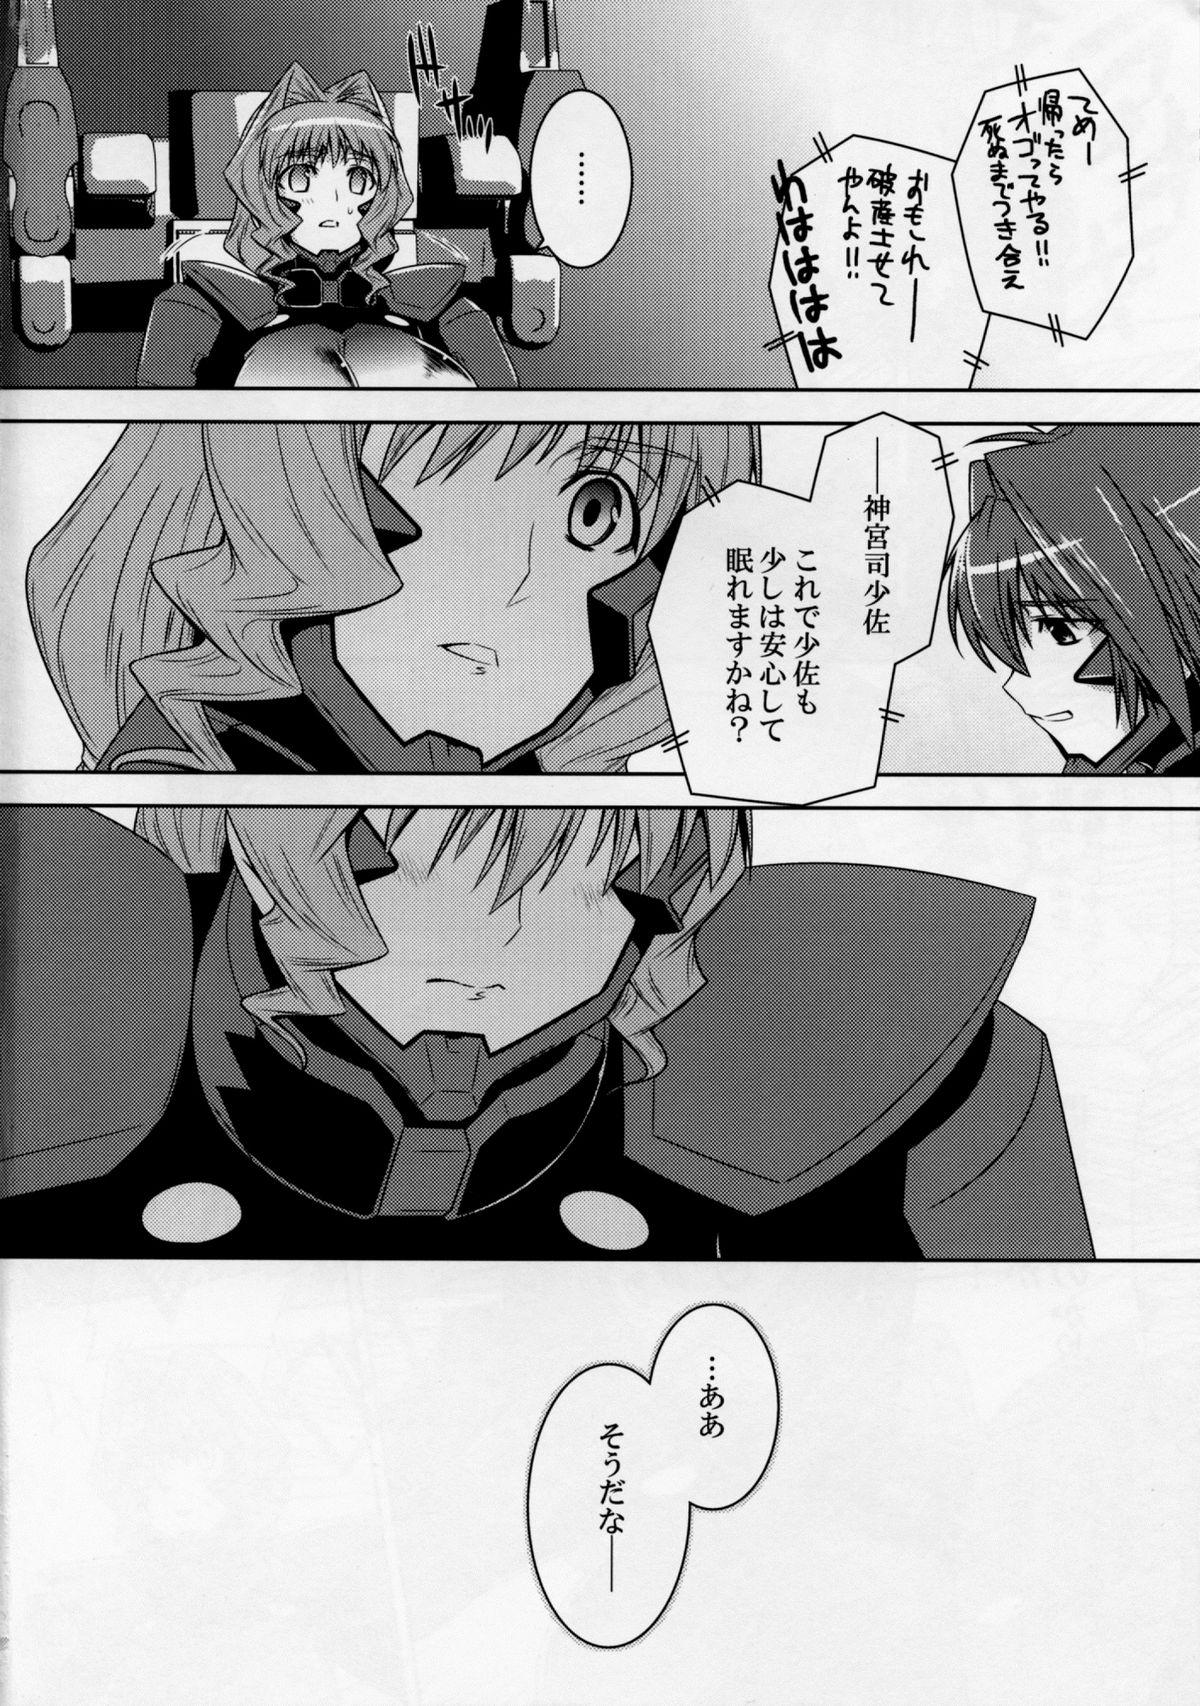 Best Blowjobs Mad Dog - Muv luv Gay Group - Page 6